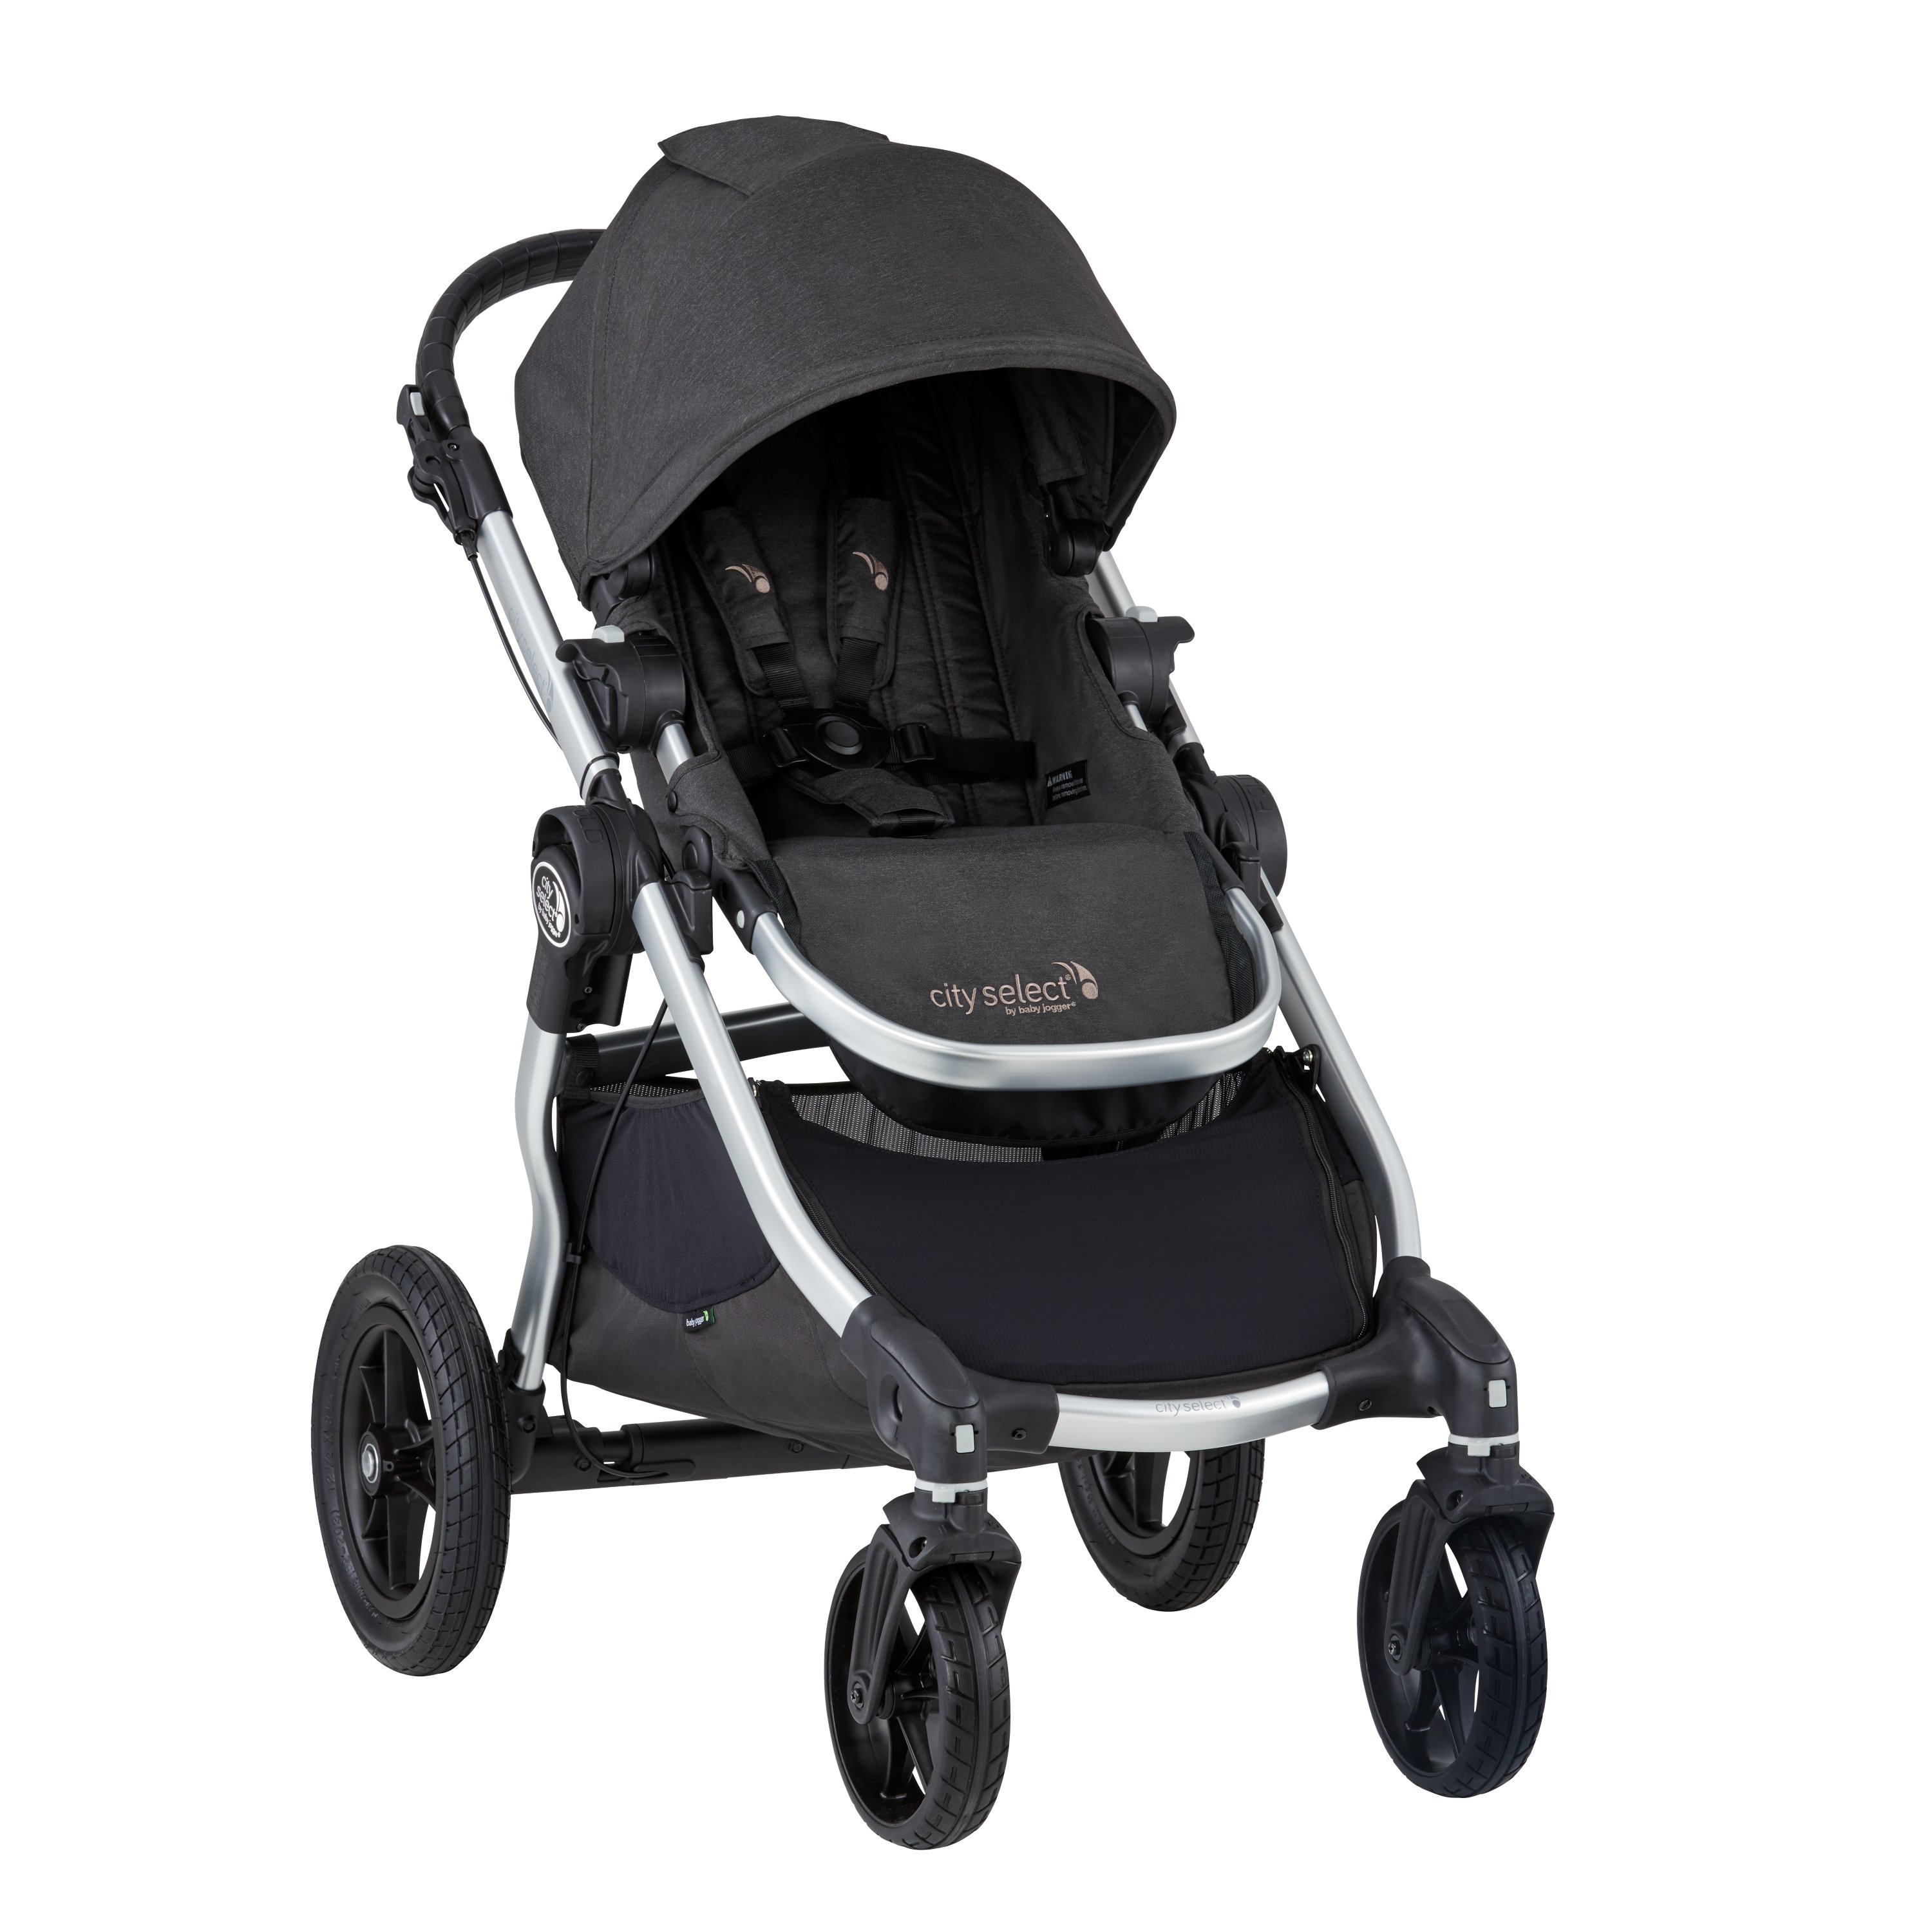 city select stroller and car seat